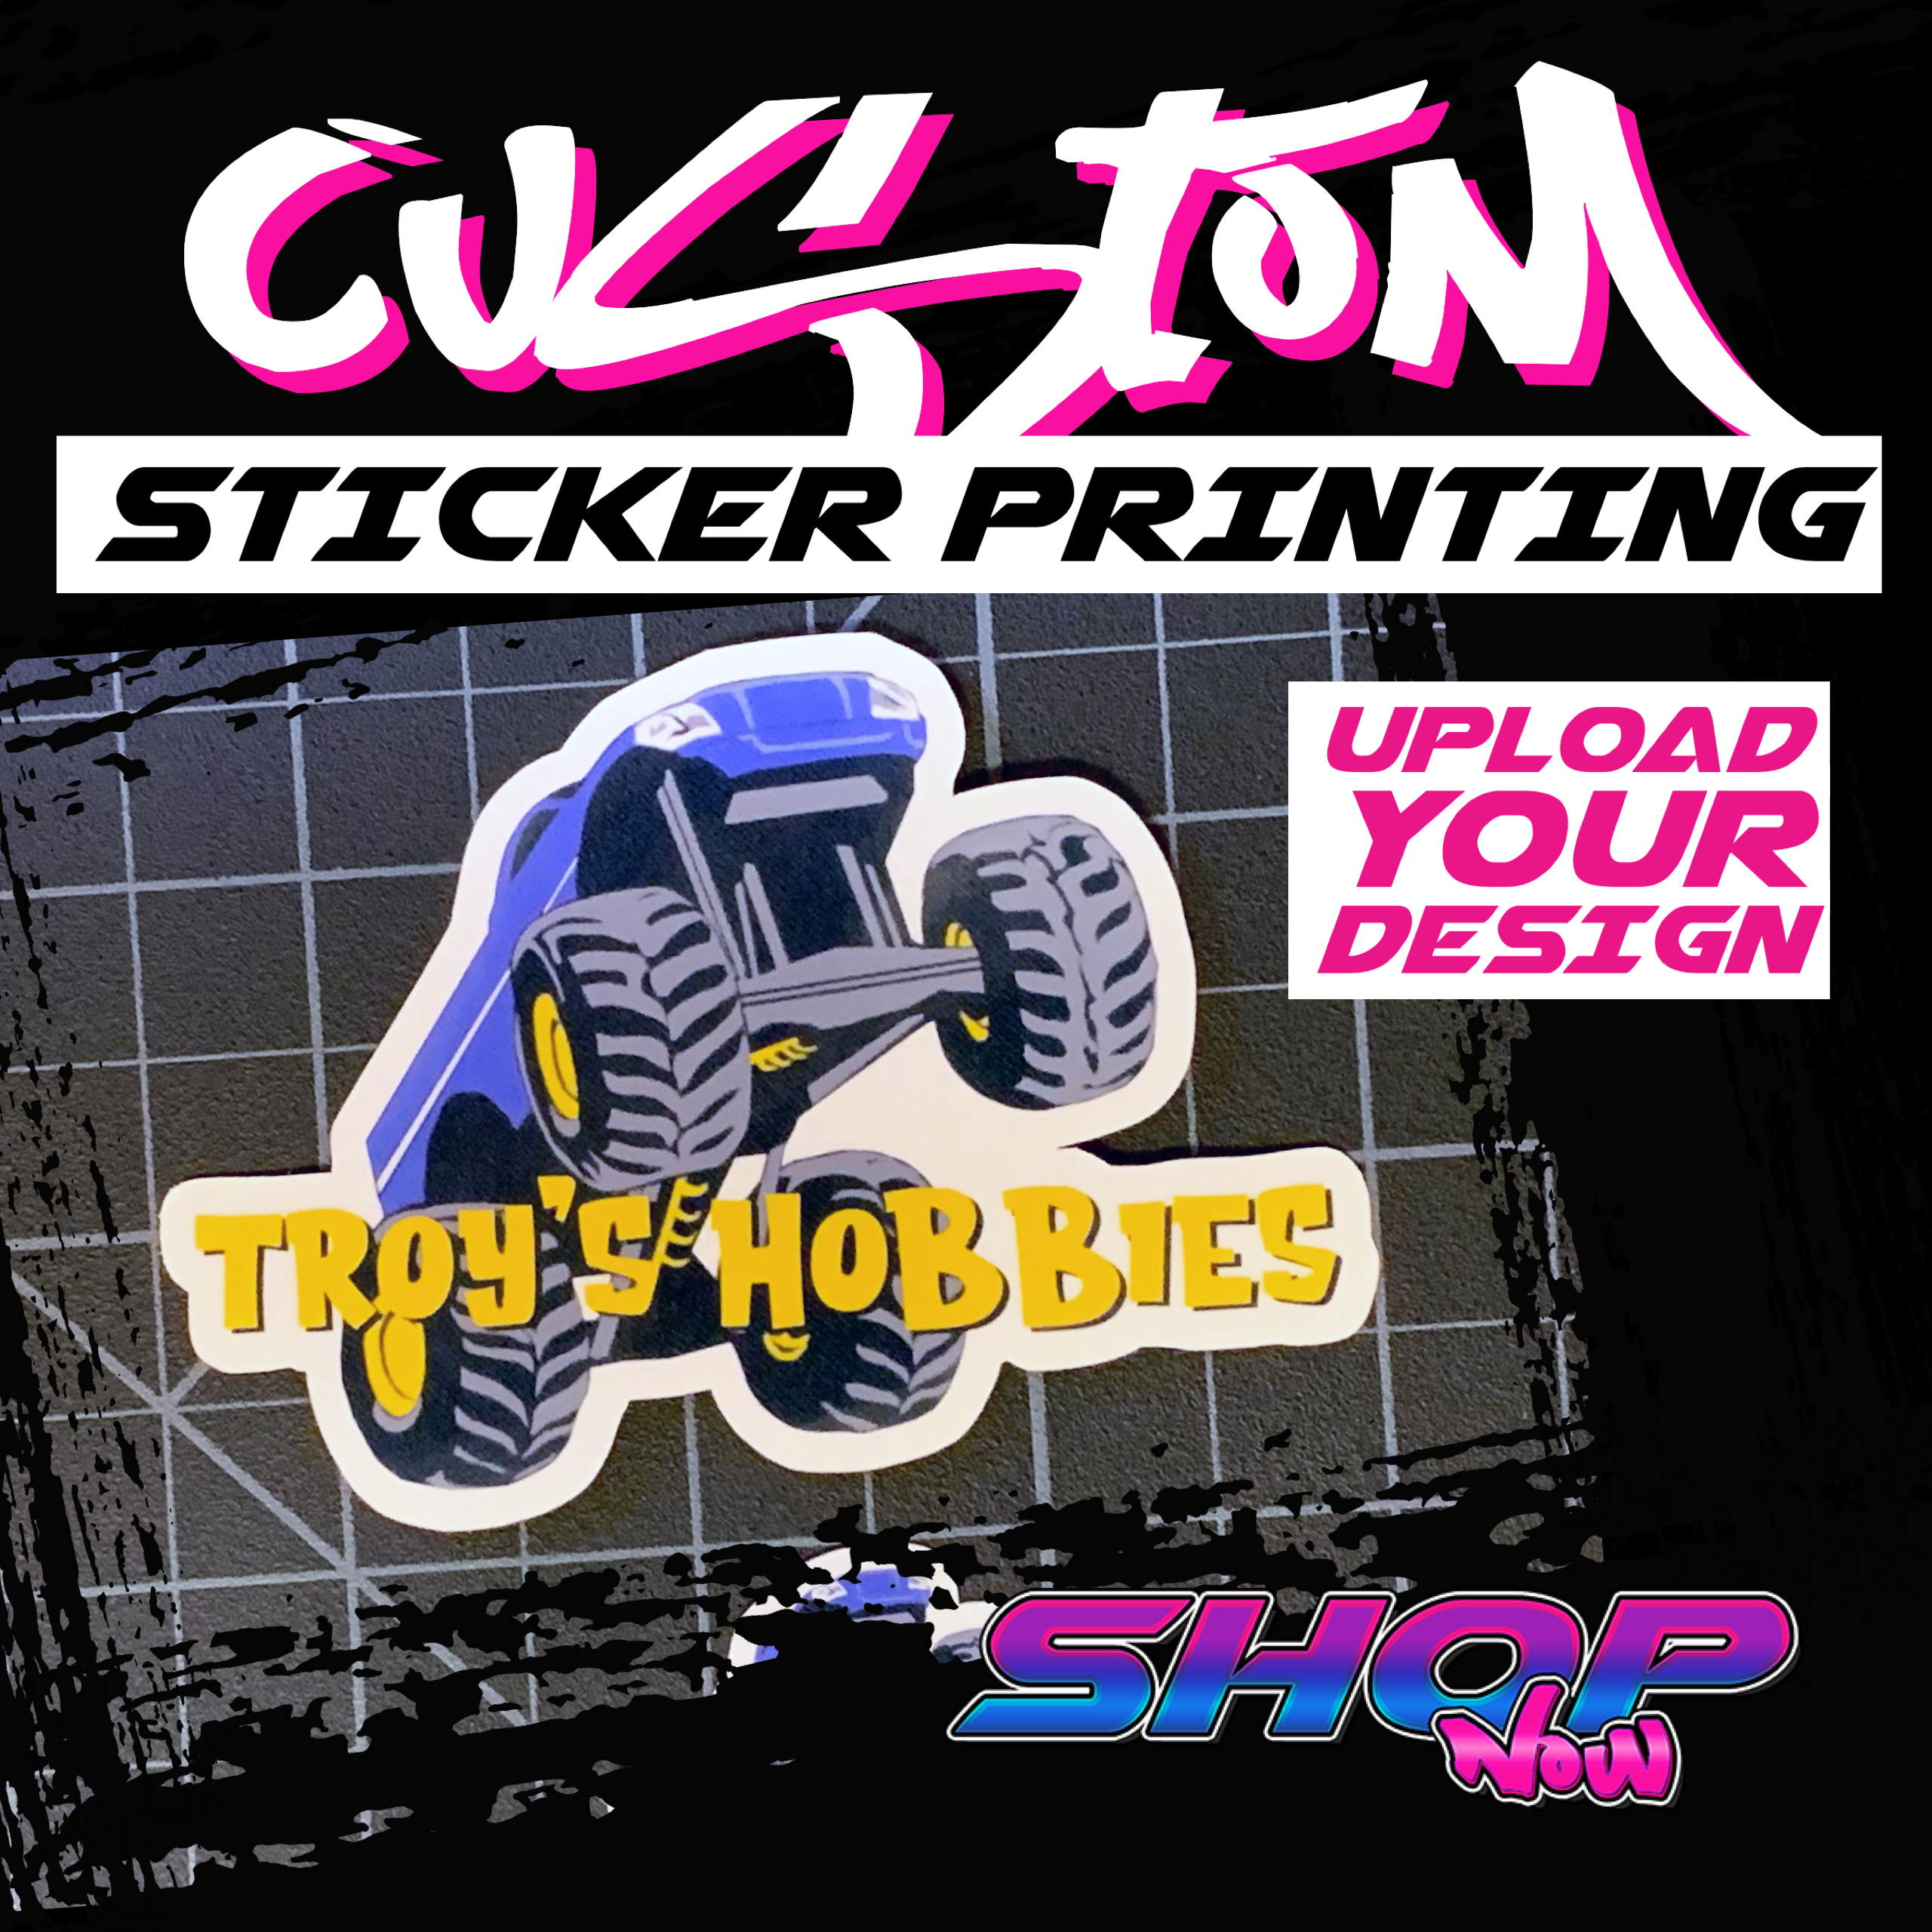 arrangere fritaget produktion Full-Color Sticker Printing Service - Upload Your Design - RC SWAG -  Stickers, T-Shirts, Hoodies, RC Kits & More!